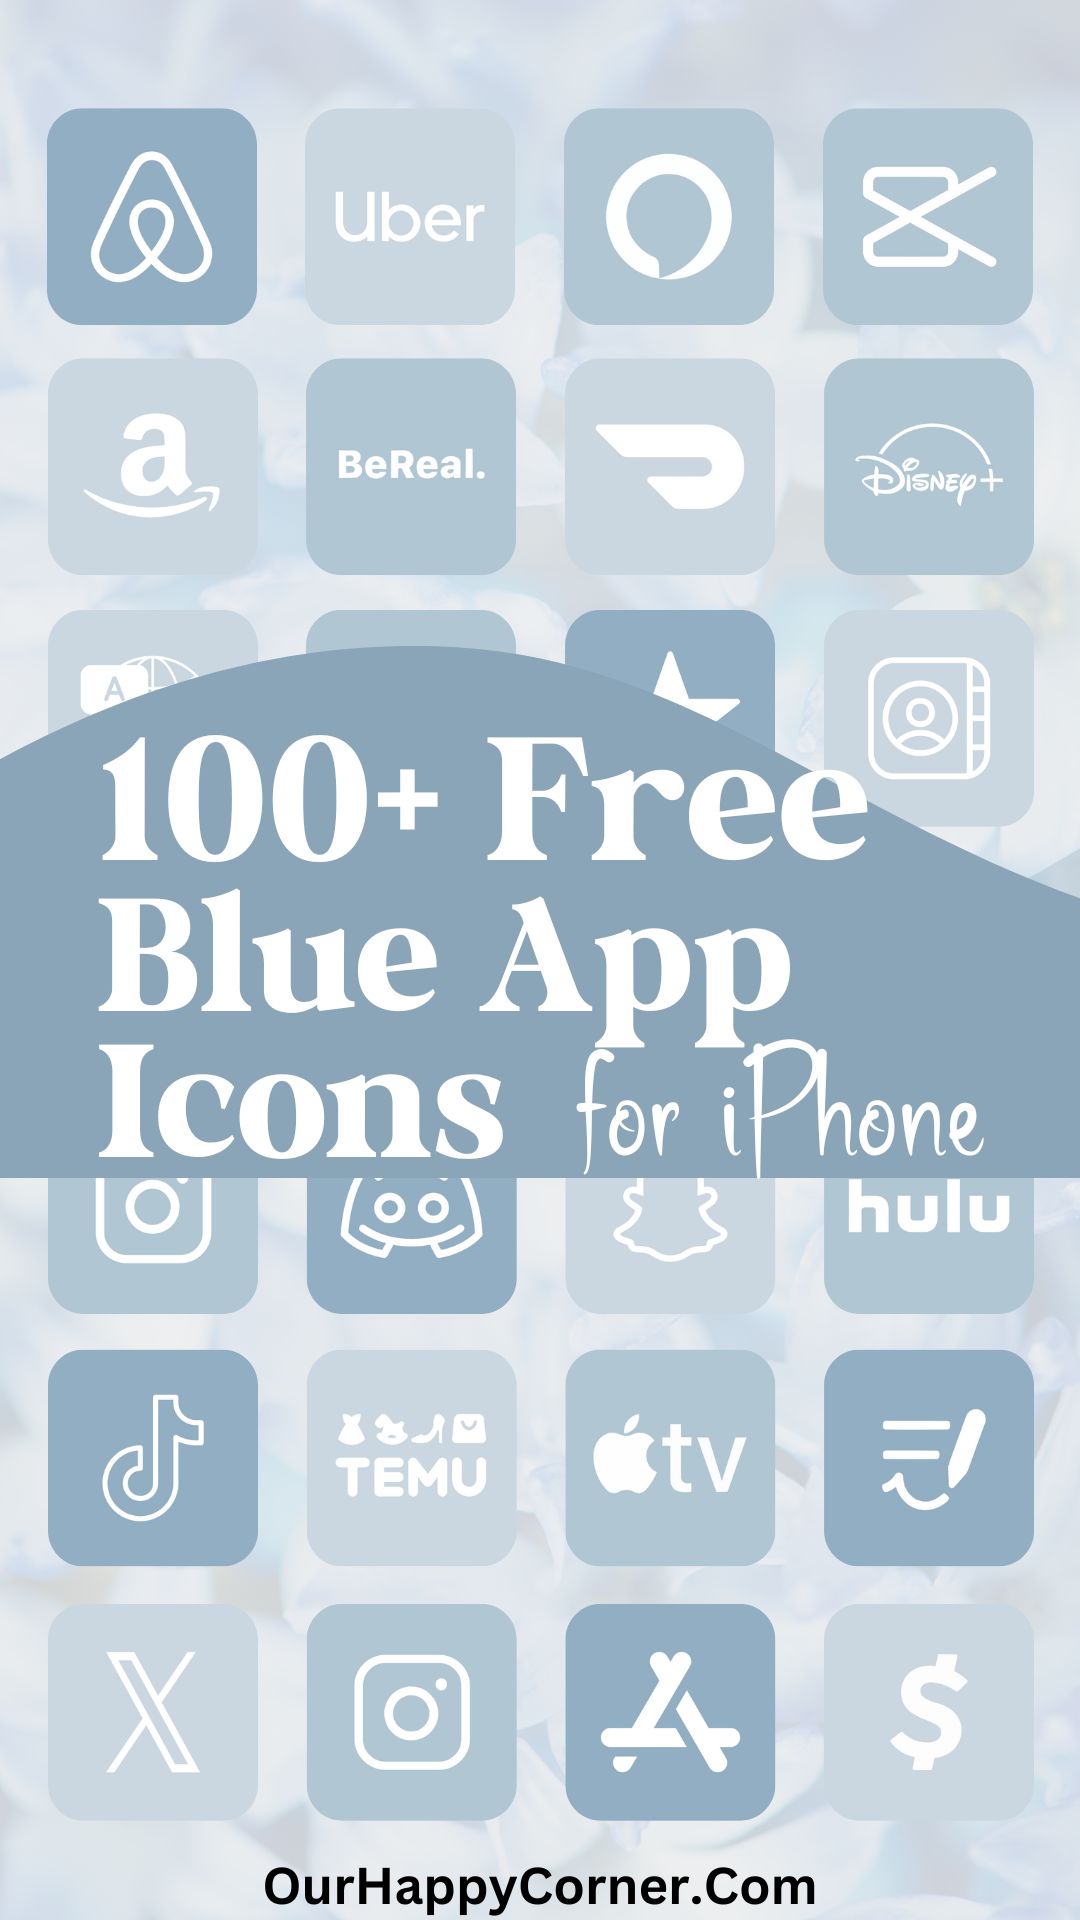 100+ Blue app icons for iPhone